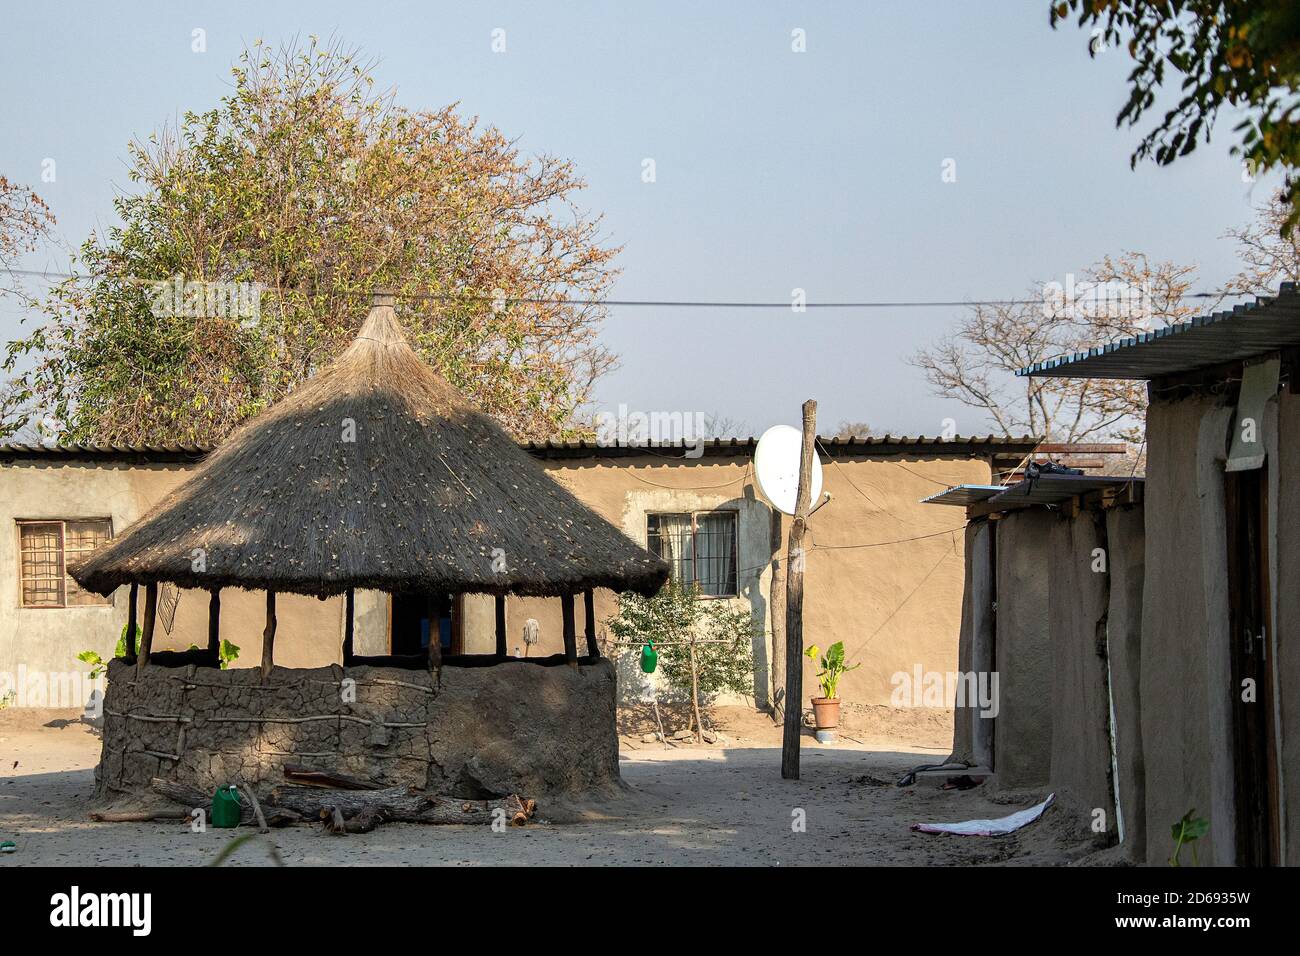 Rondavel made of timber and thatched in a village in the Kalimbeza (Kalambesa) area near to Katima Mulilo in Namibia. Stock Photo